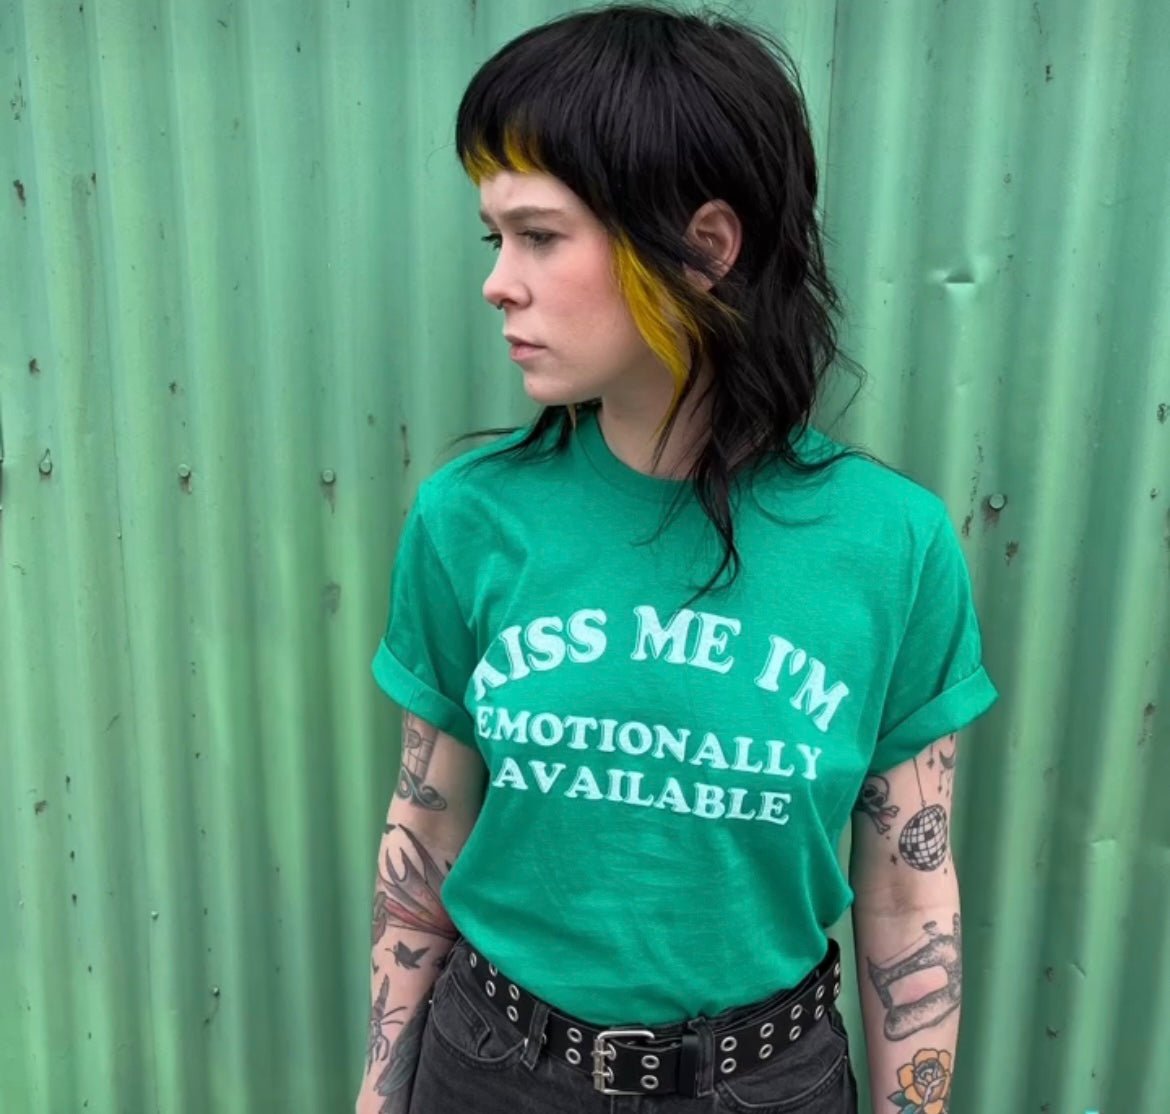 Emotionally Available T Shirt - Low Road Merch